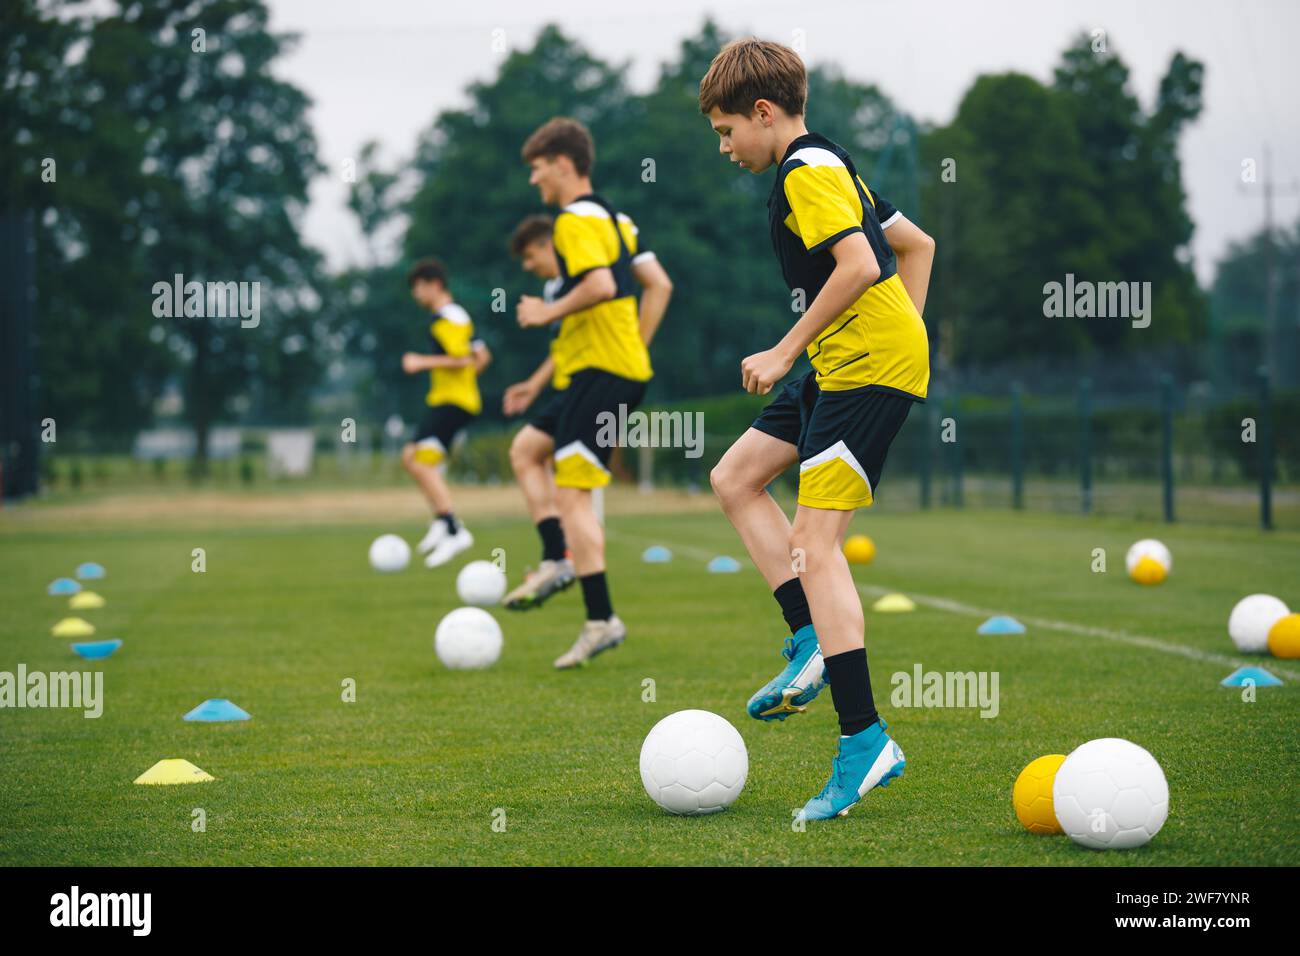 Football Academy For Teens. Youth Football Player in Soccer Ball Control Drills. Young Boys in the Football Team At Workout. Ambitious Young Athletes Stock Photo